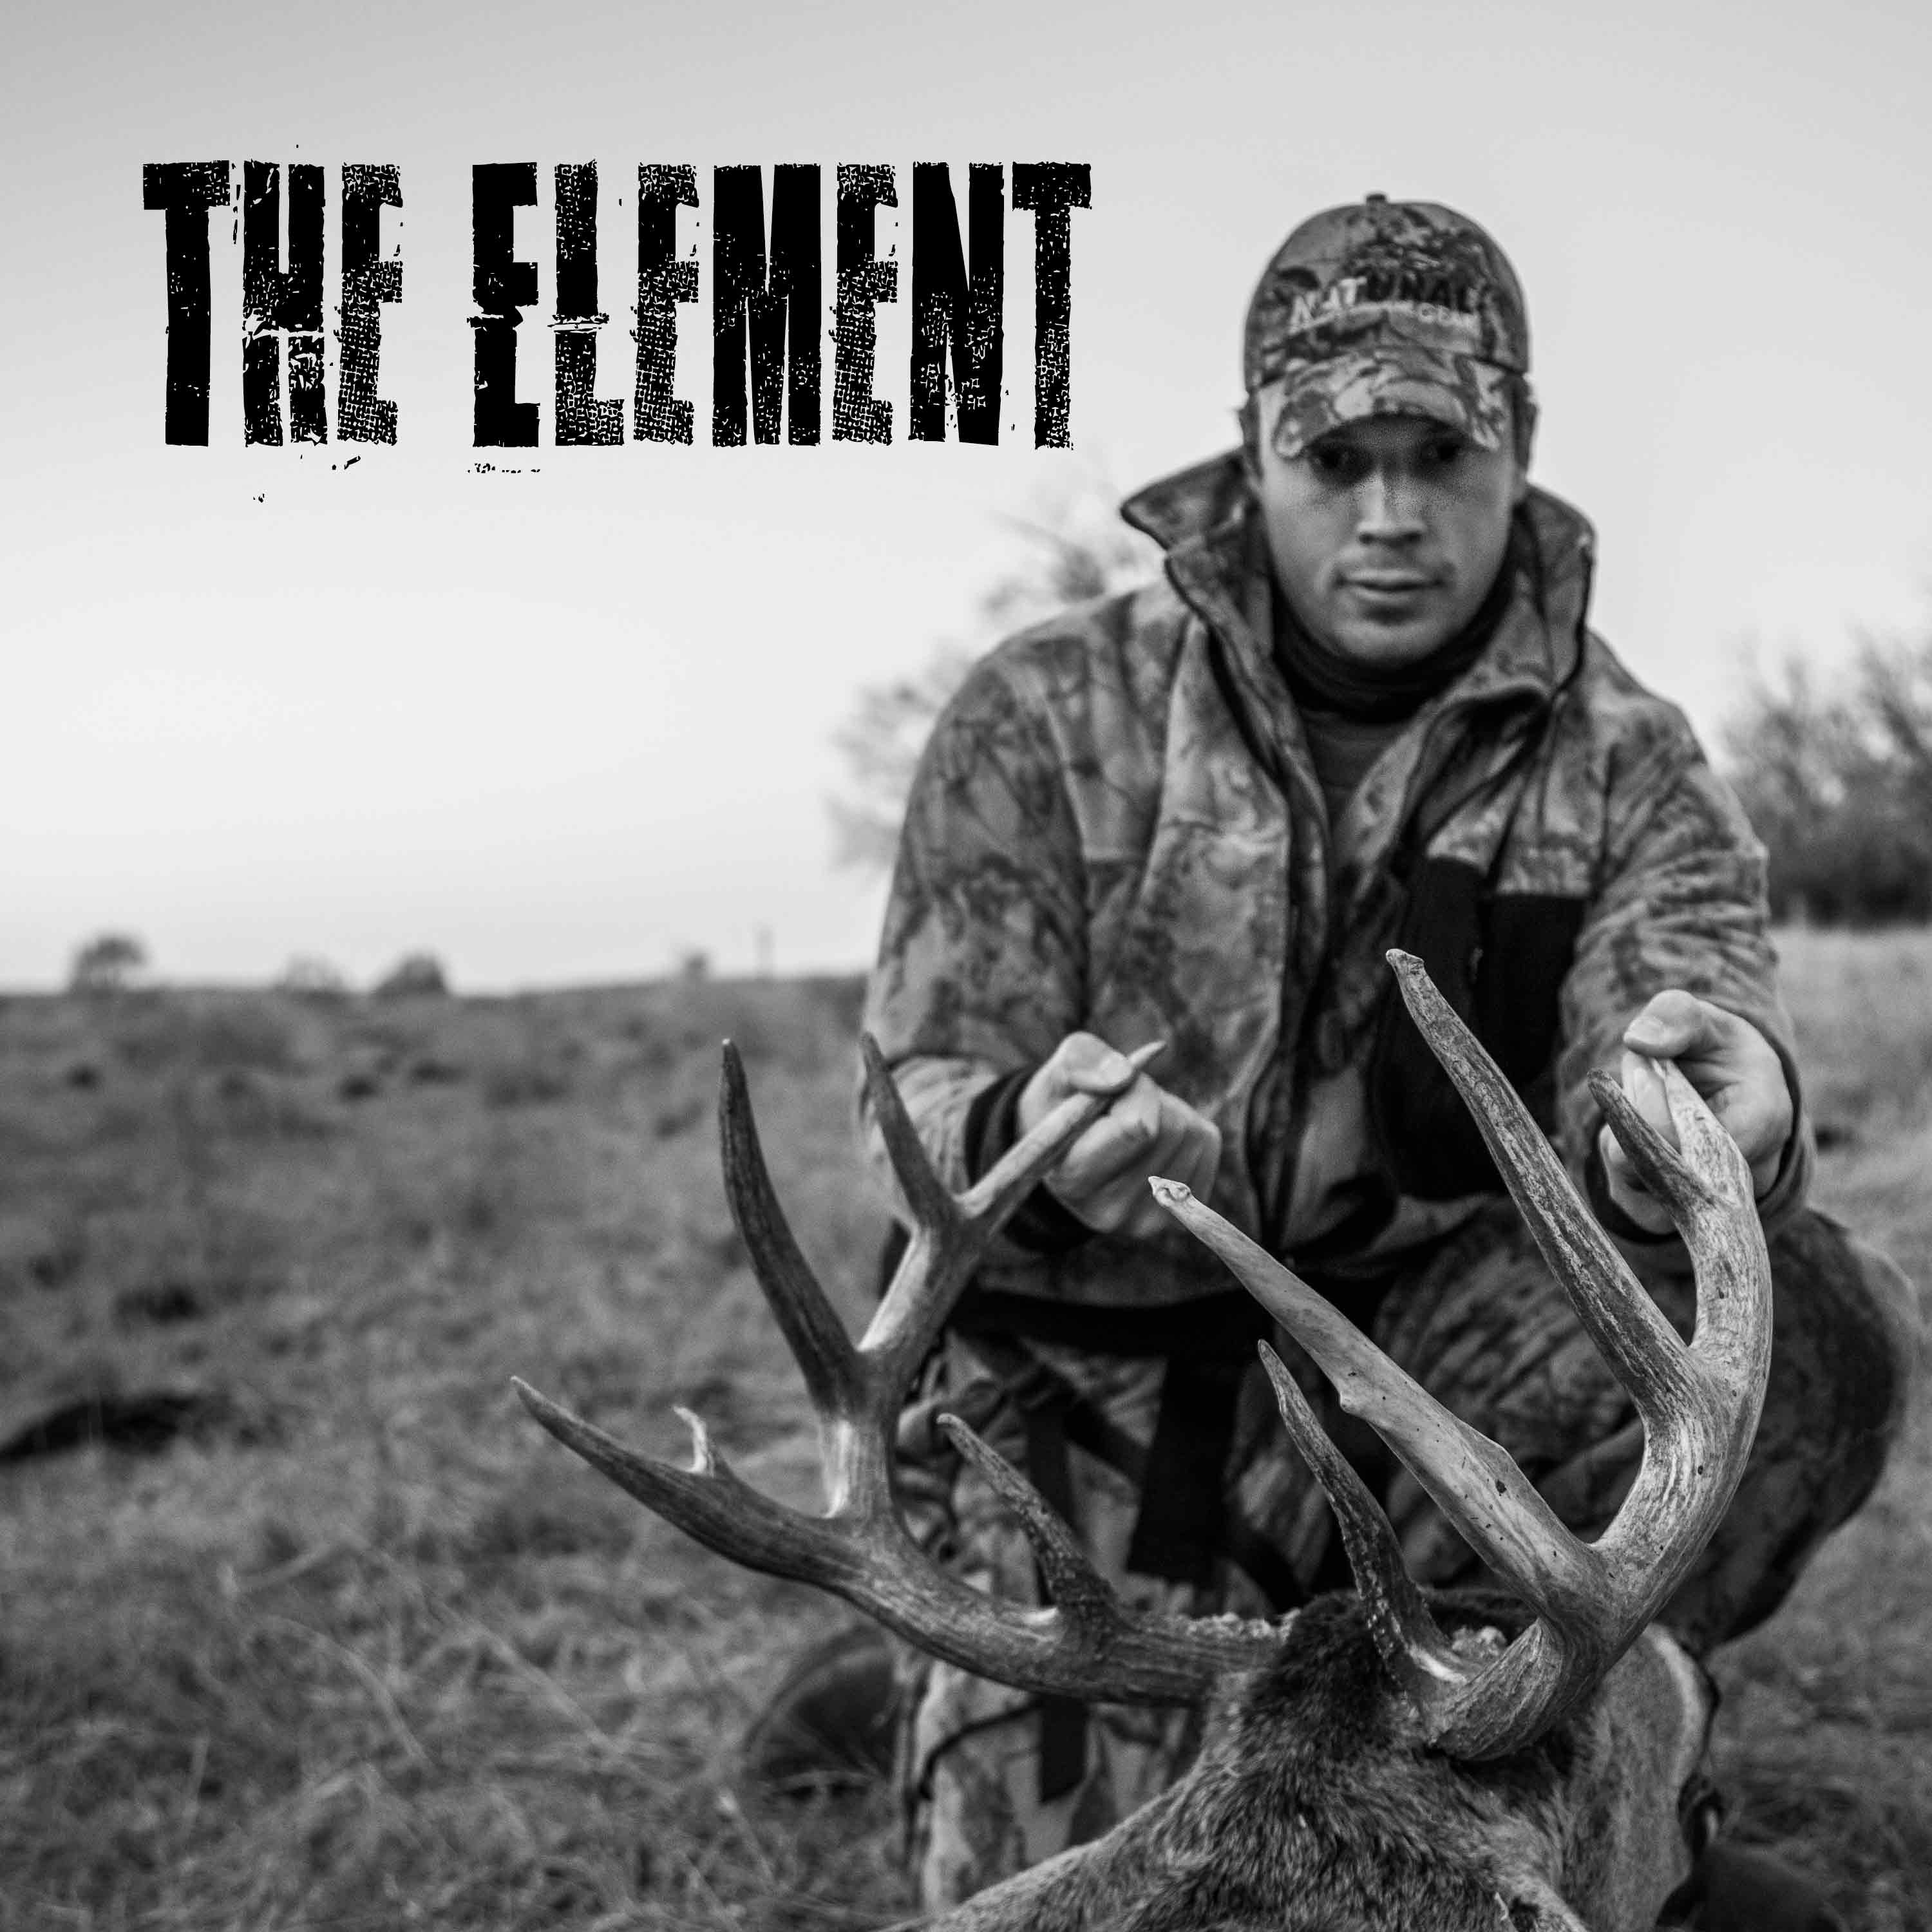 E156: Chasing 49 (Feat. Stephen Spurlock and Keith Ott Discussing Hunting and Filming Turkey, Travel, Friendship, and Why They're Chasing 49)